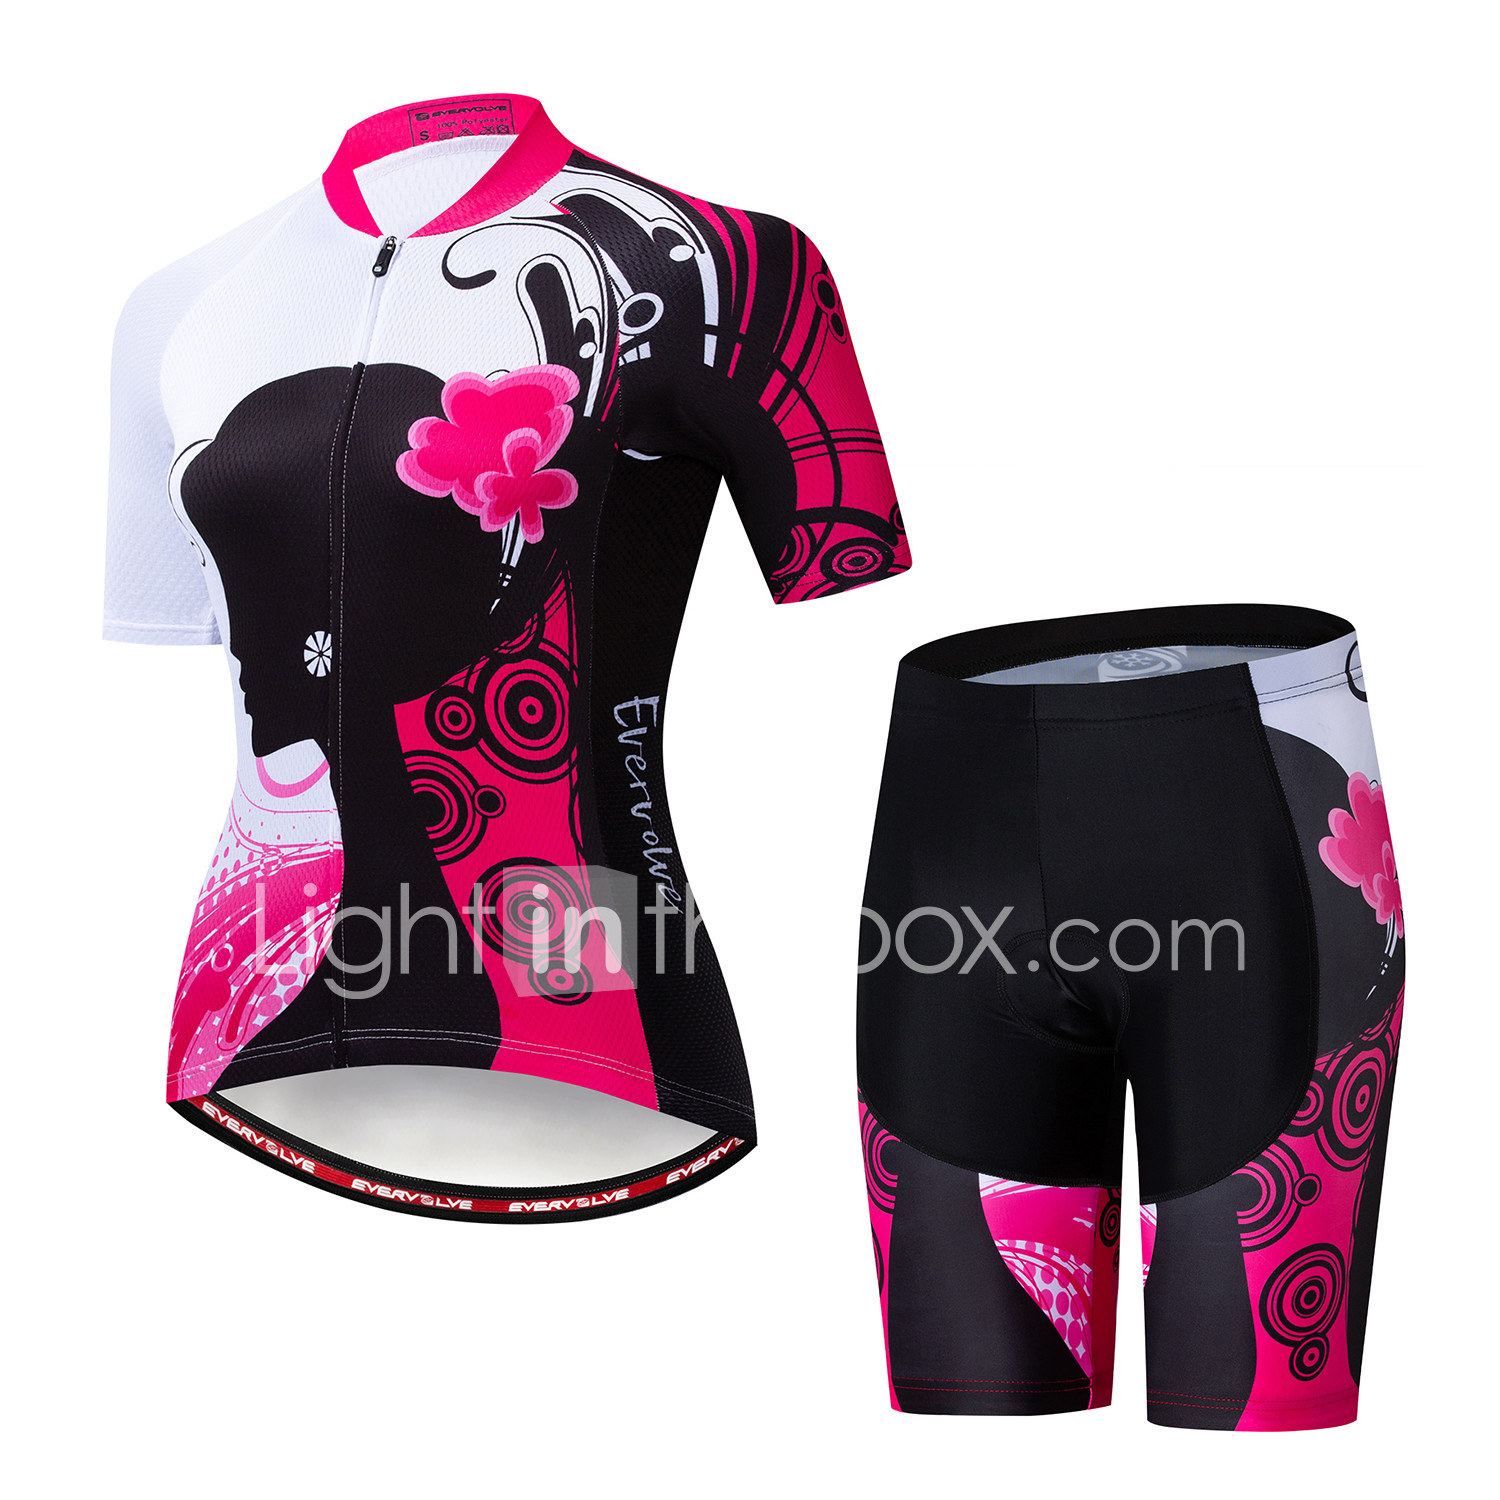 light in the box cycling clothing